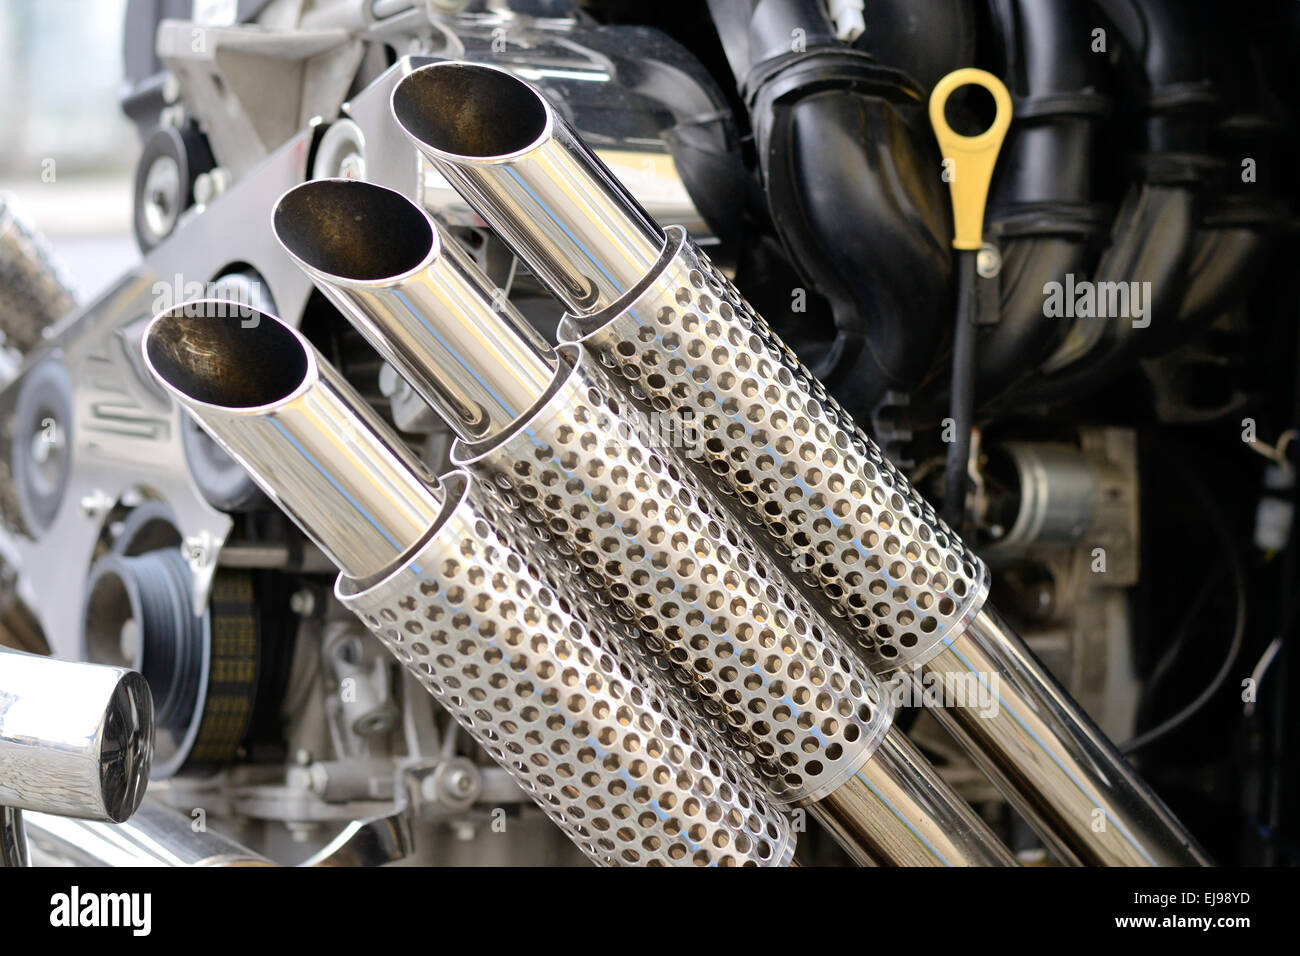 Exhaust system of a Trike Stock Photo